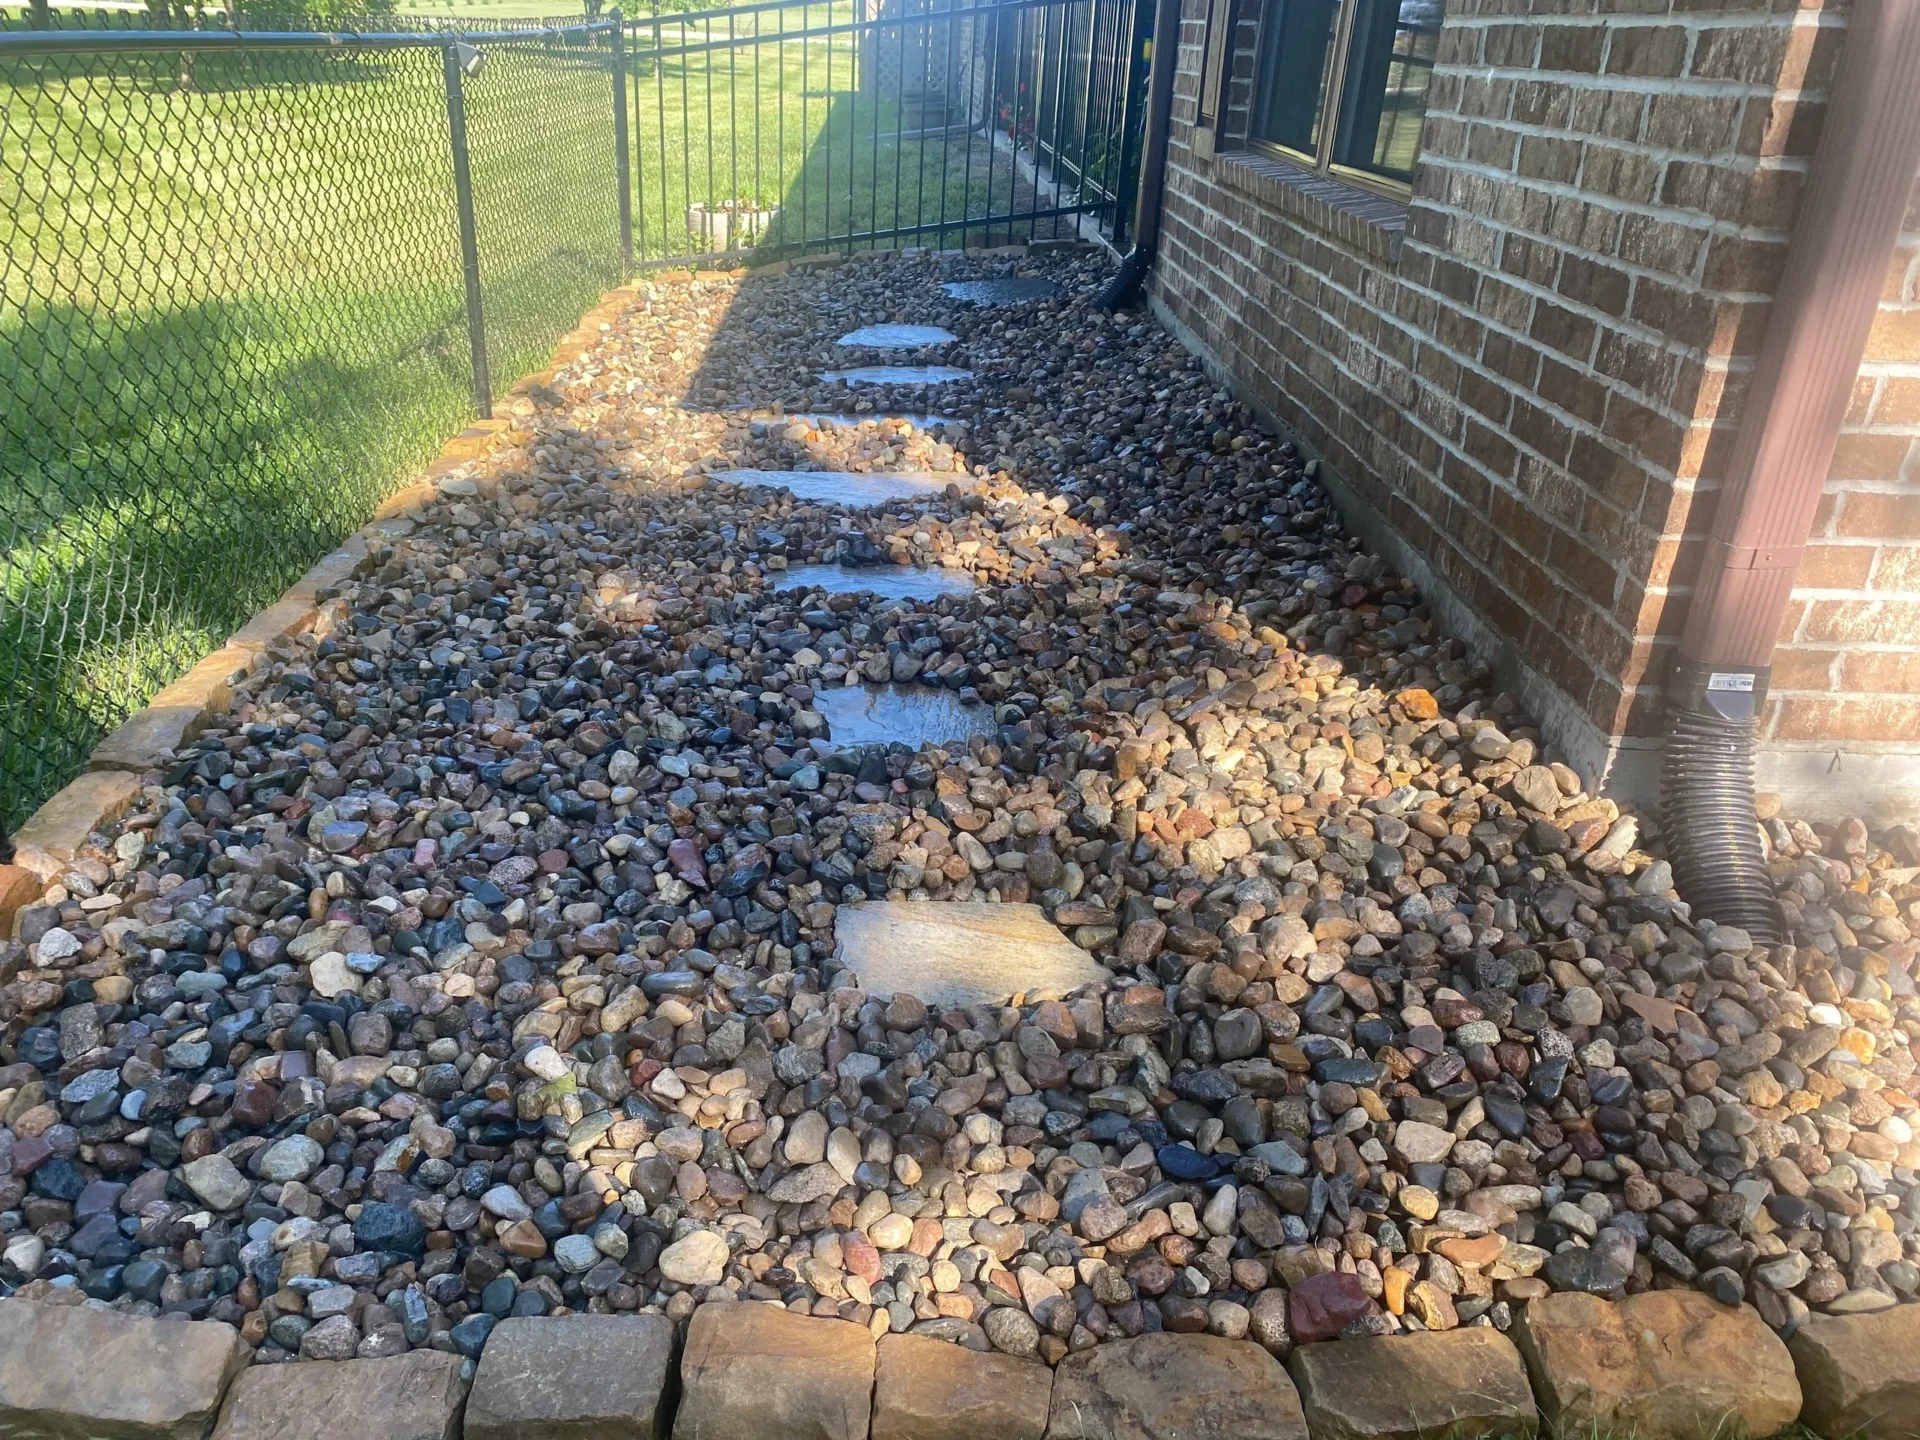 A brick walkway with rocks and bricks in the middle of it.